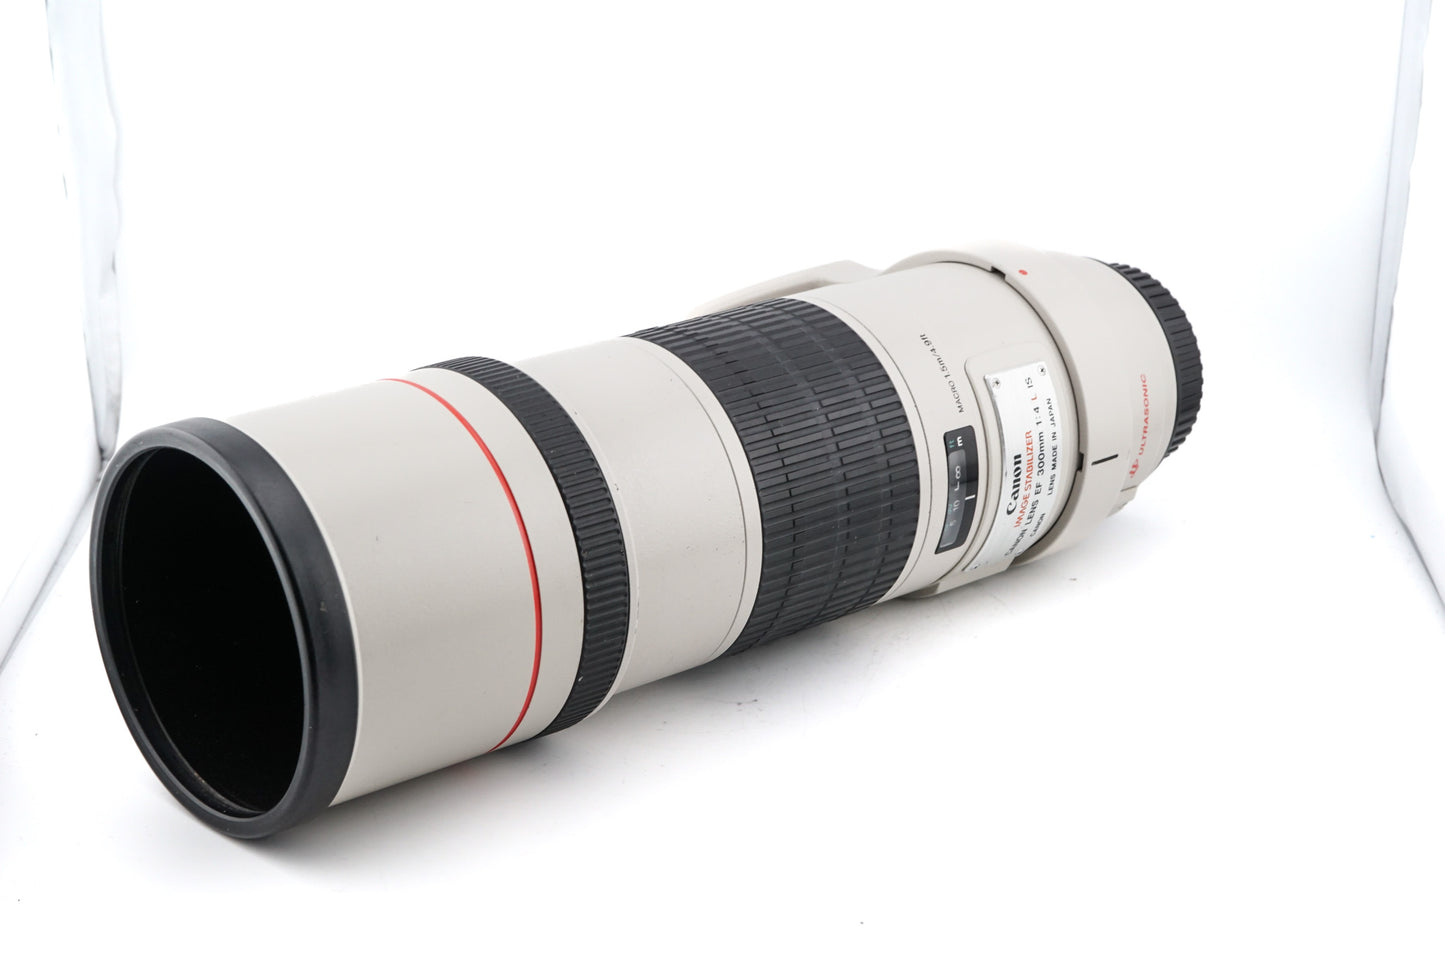 Canon 300mm f4 L IS USM